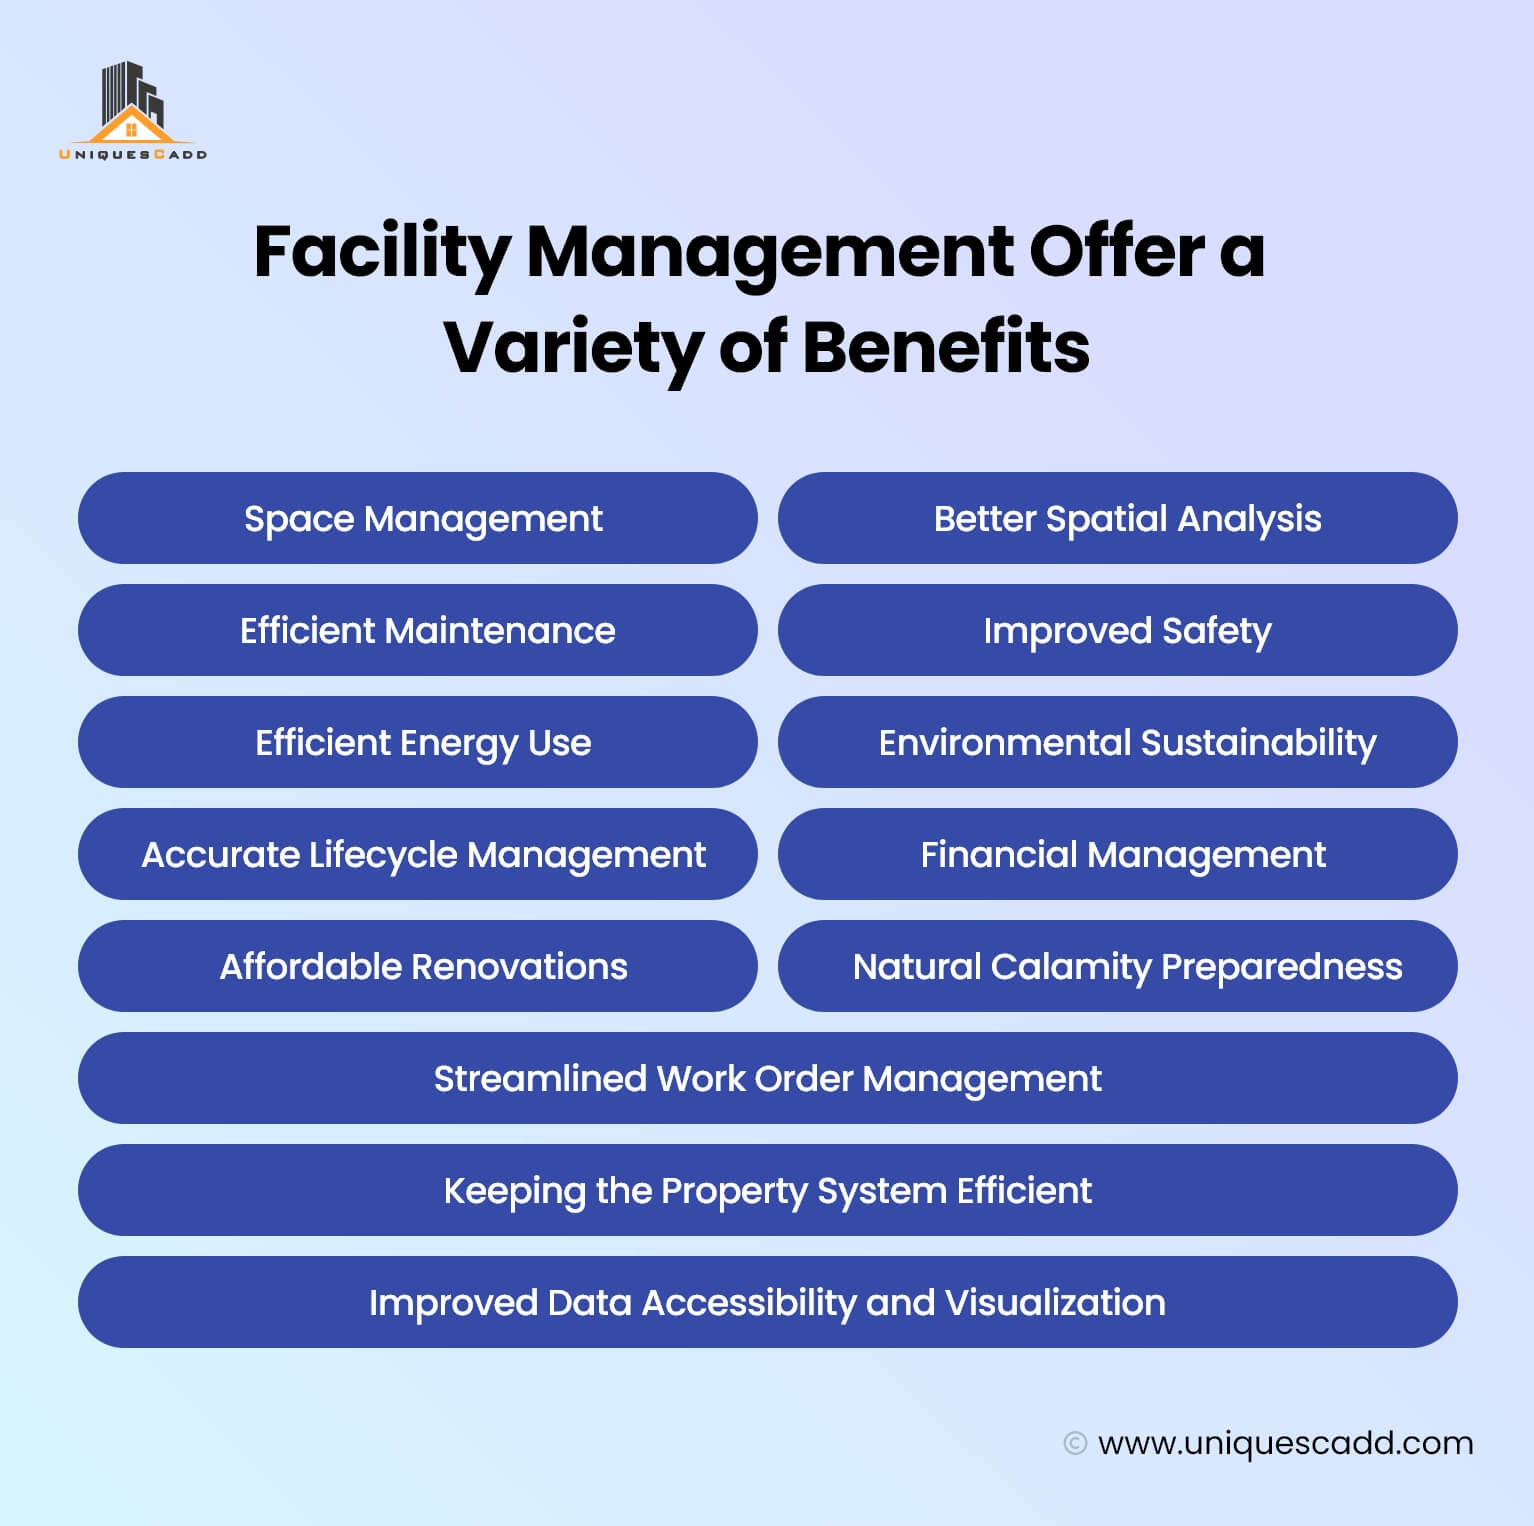 Facility Management Offer a Variety of Benefits